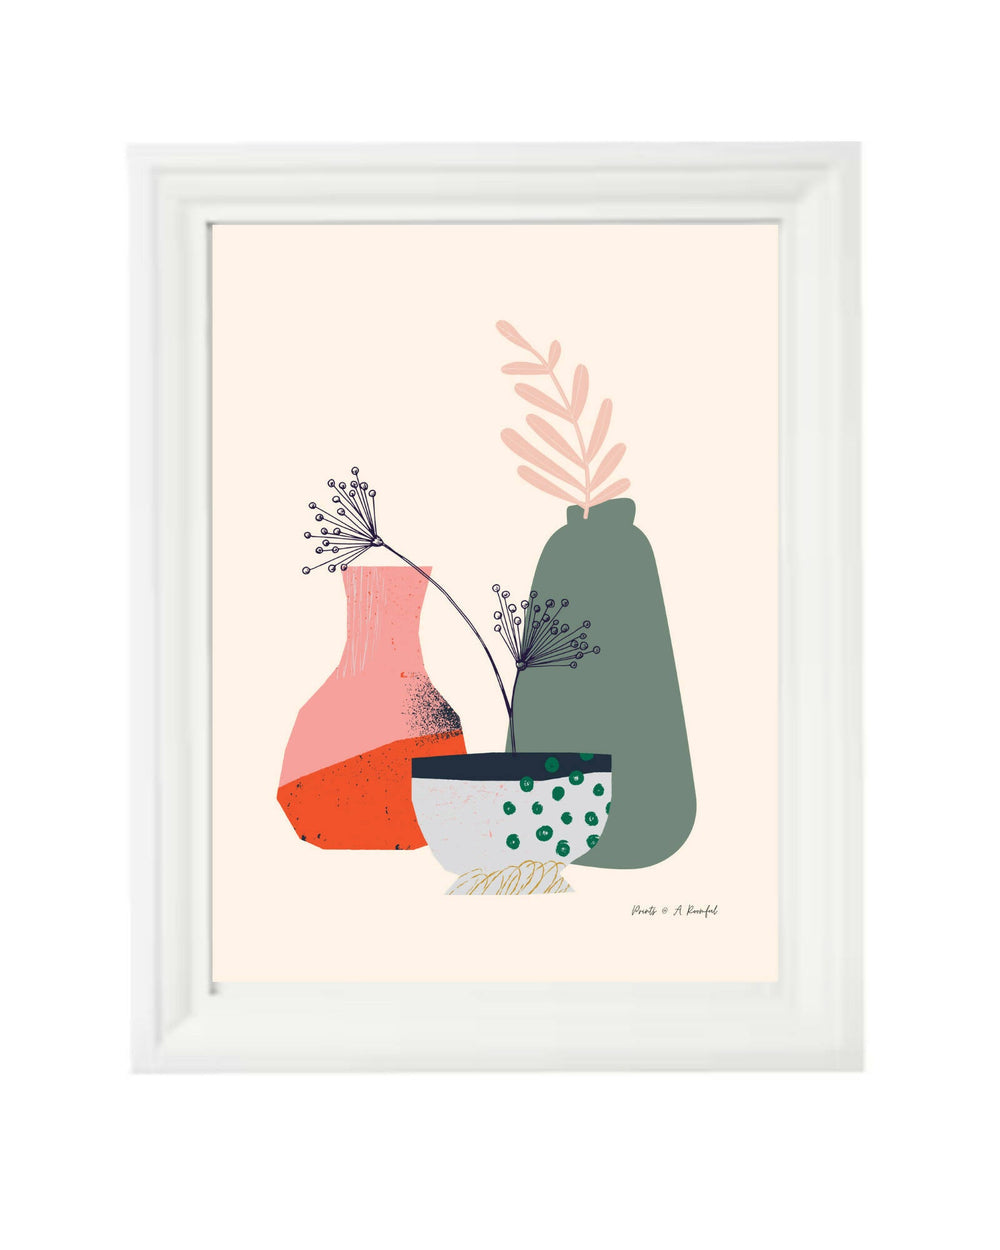 wall art : Inspired by flowers and vases (yelllow centre piece) Art Prints@ARoomful 40cm x 50cm 